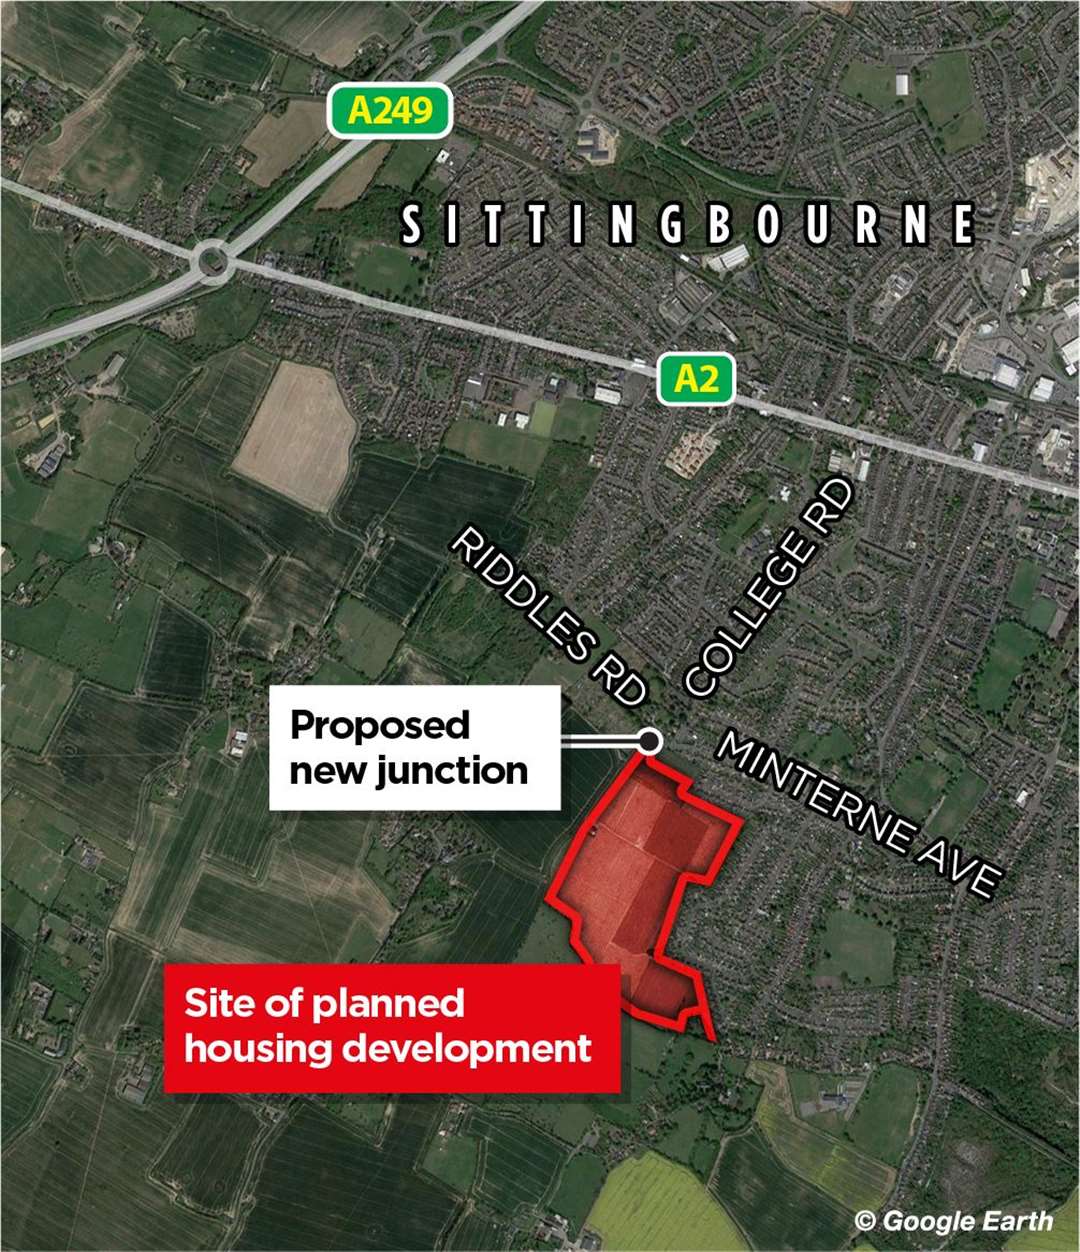 The proposed site outlined in red